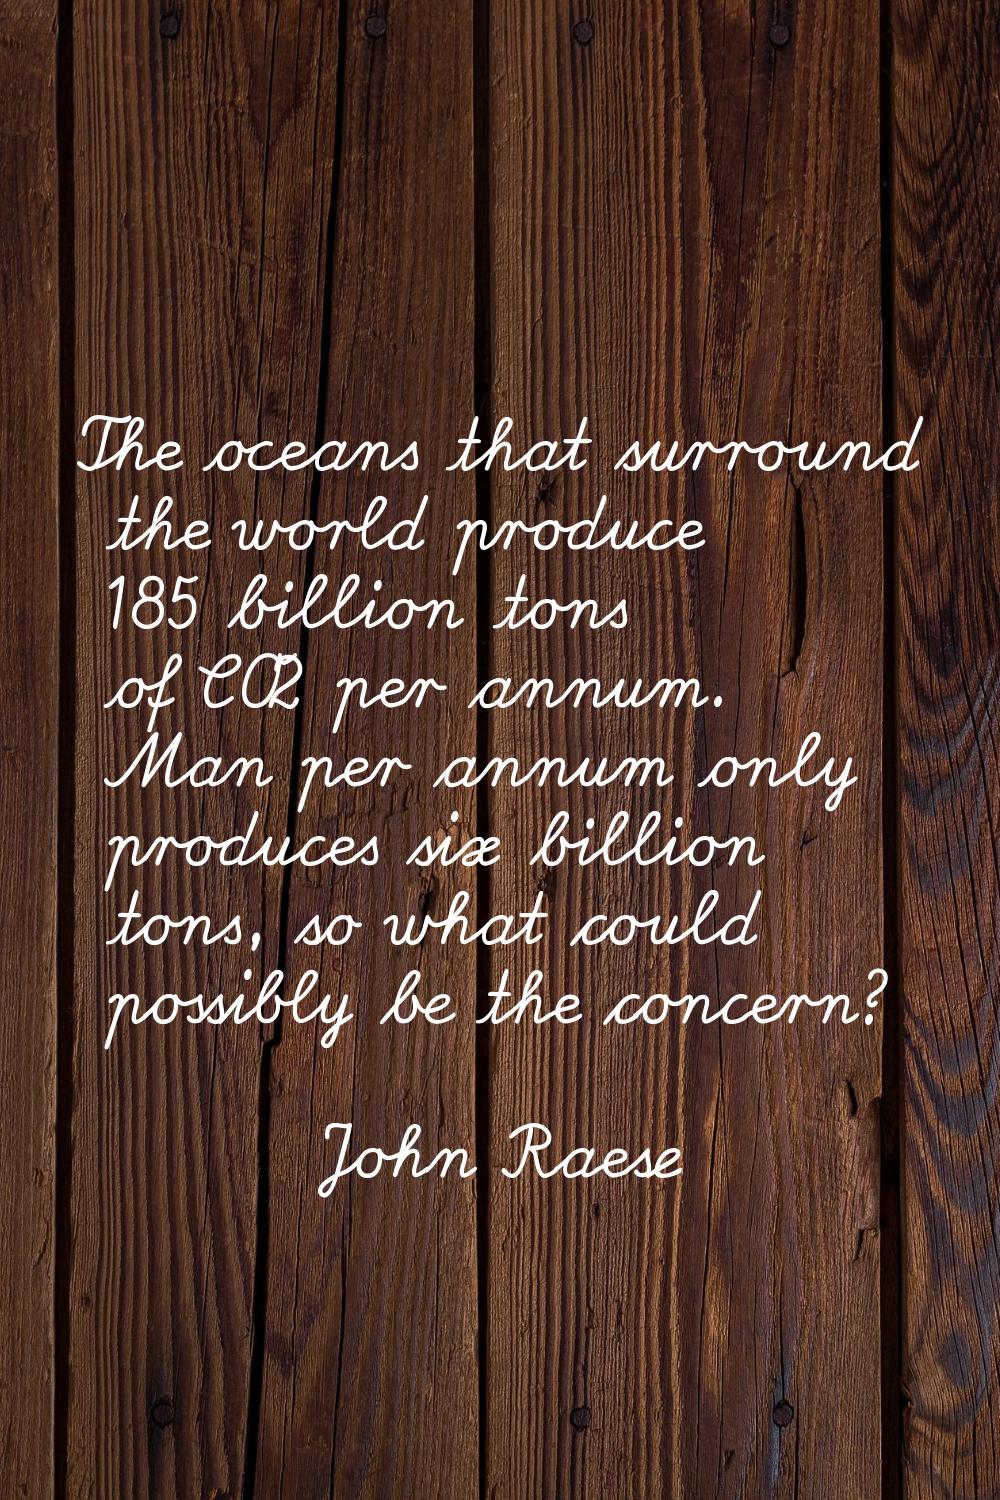 The oceans that surround the world produce 185 billion tons of CO2 per annum. Man per annum only pr